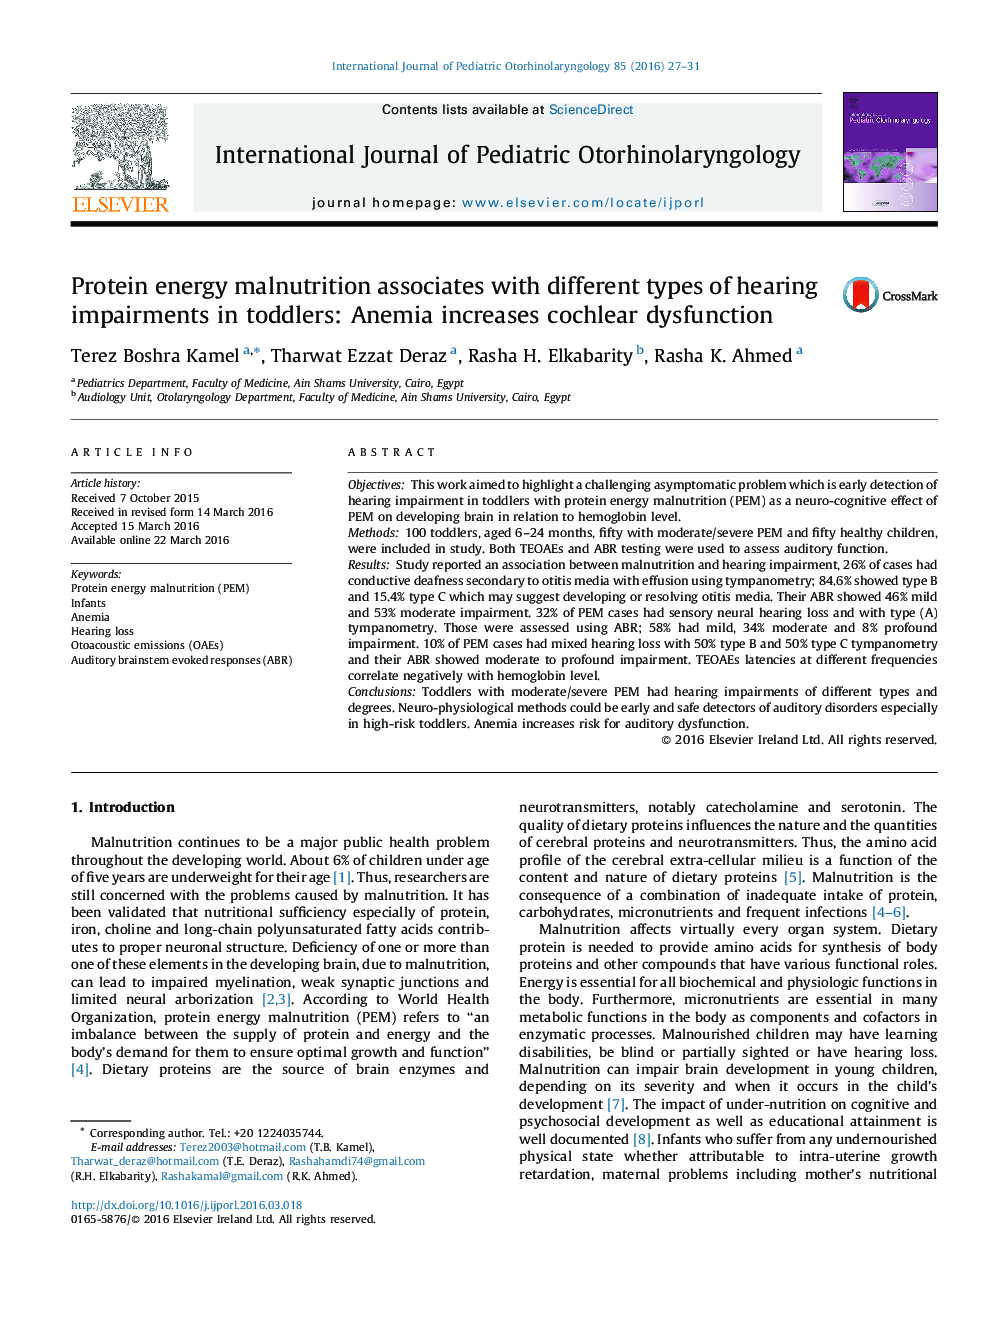 Protein energy malnutrition associates with different types of hearing impairments in toddlers: Anemia increases cochlear dysfunction